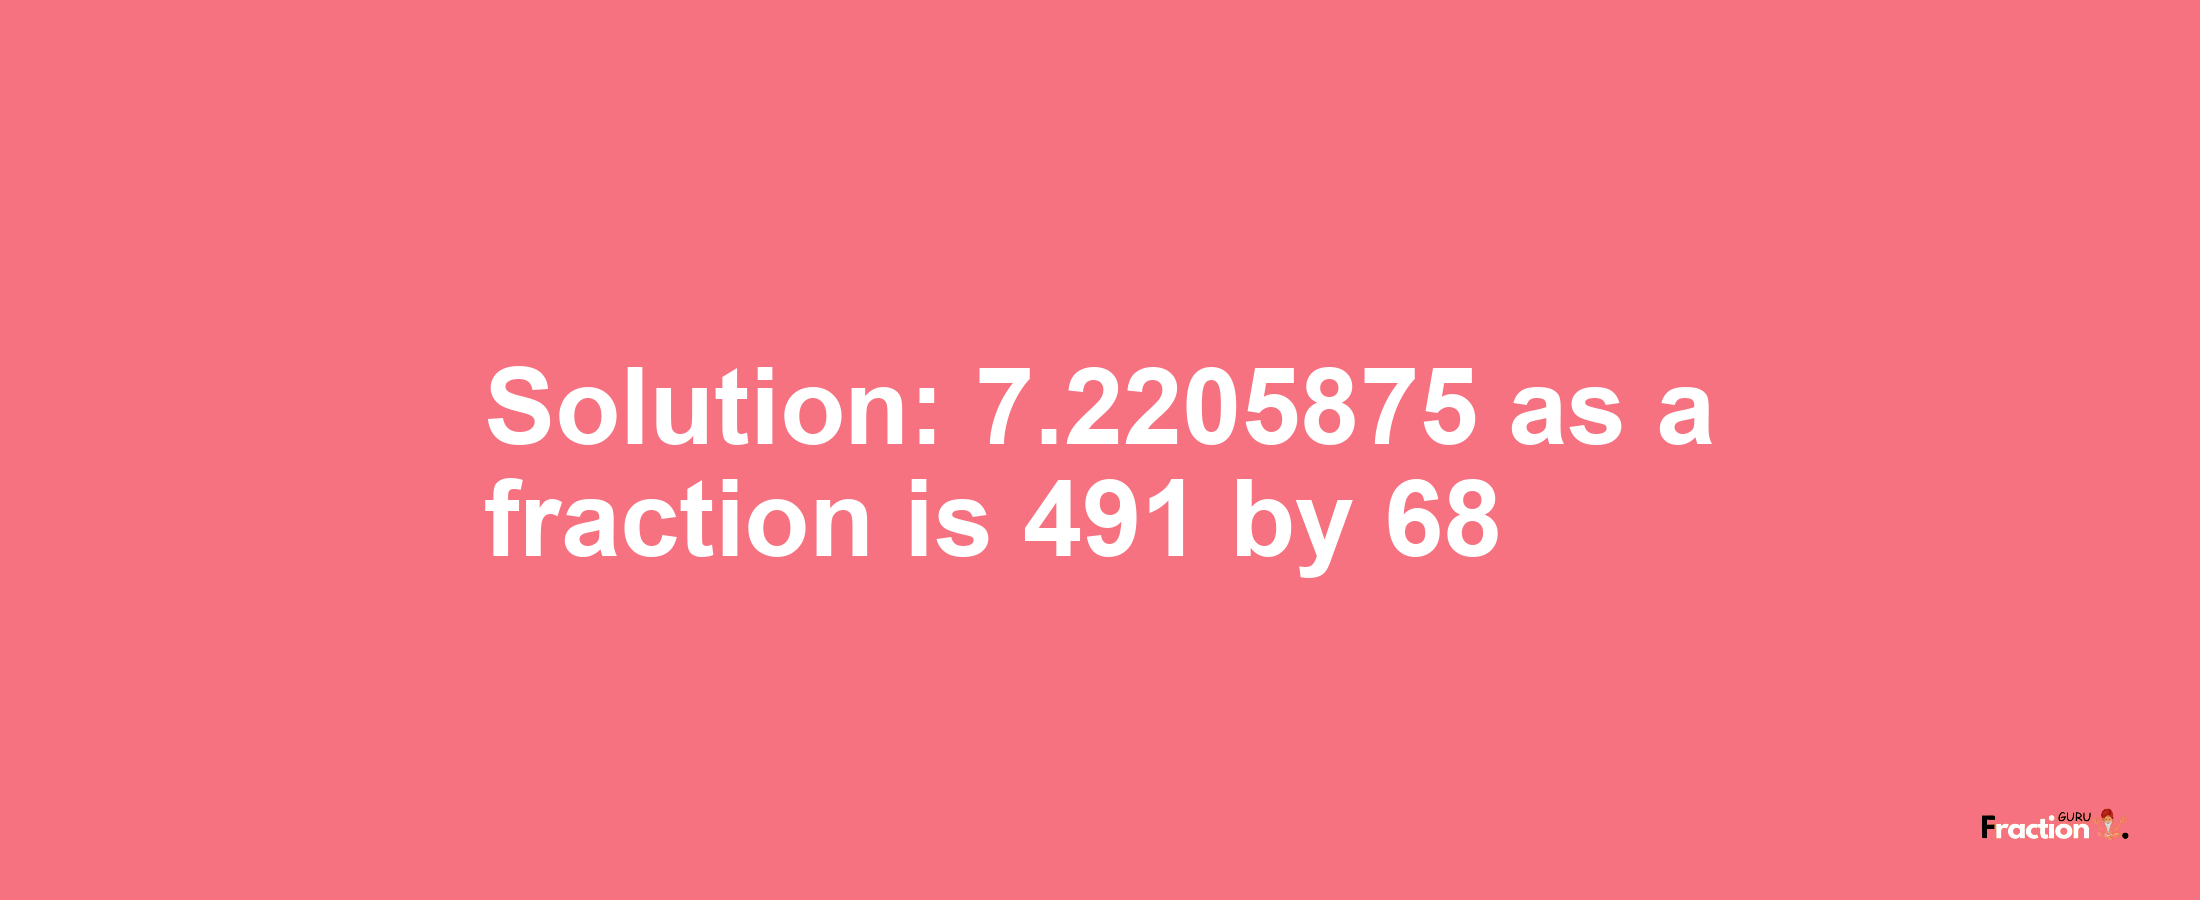 Solution:7.2205875 as a fraction is 491/68